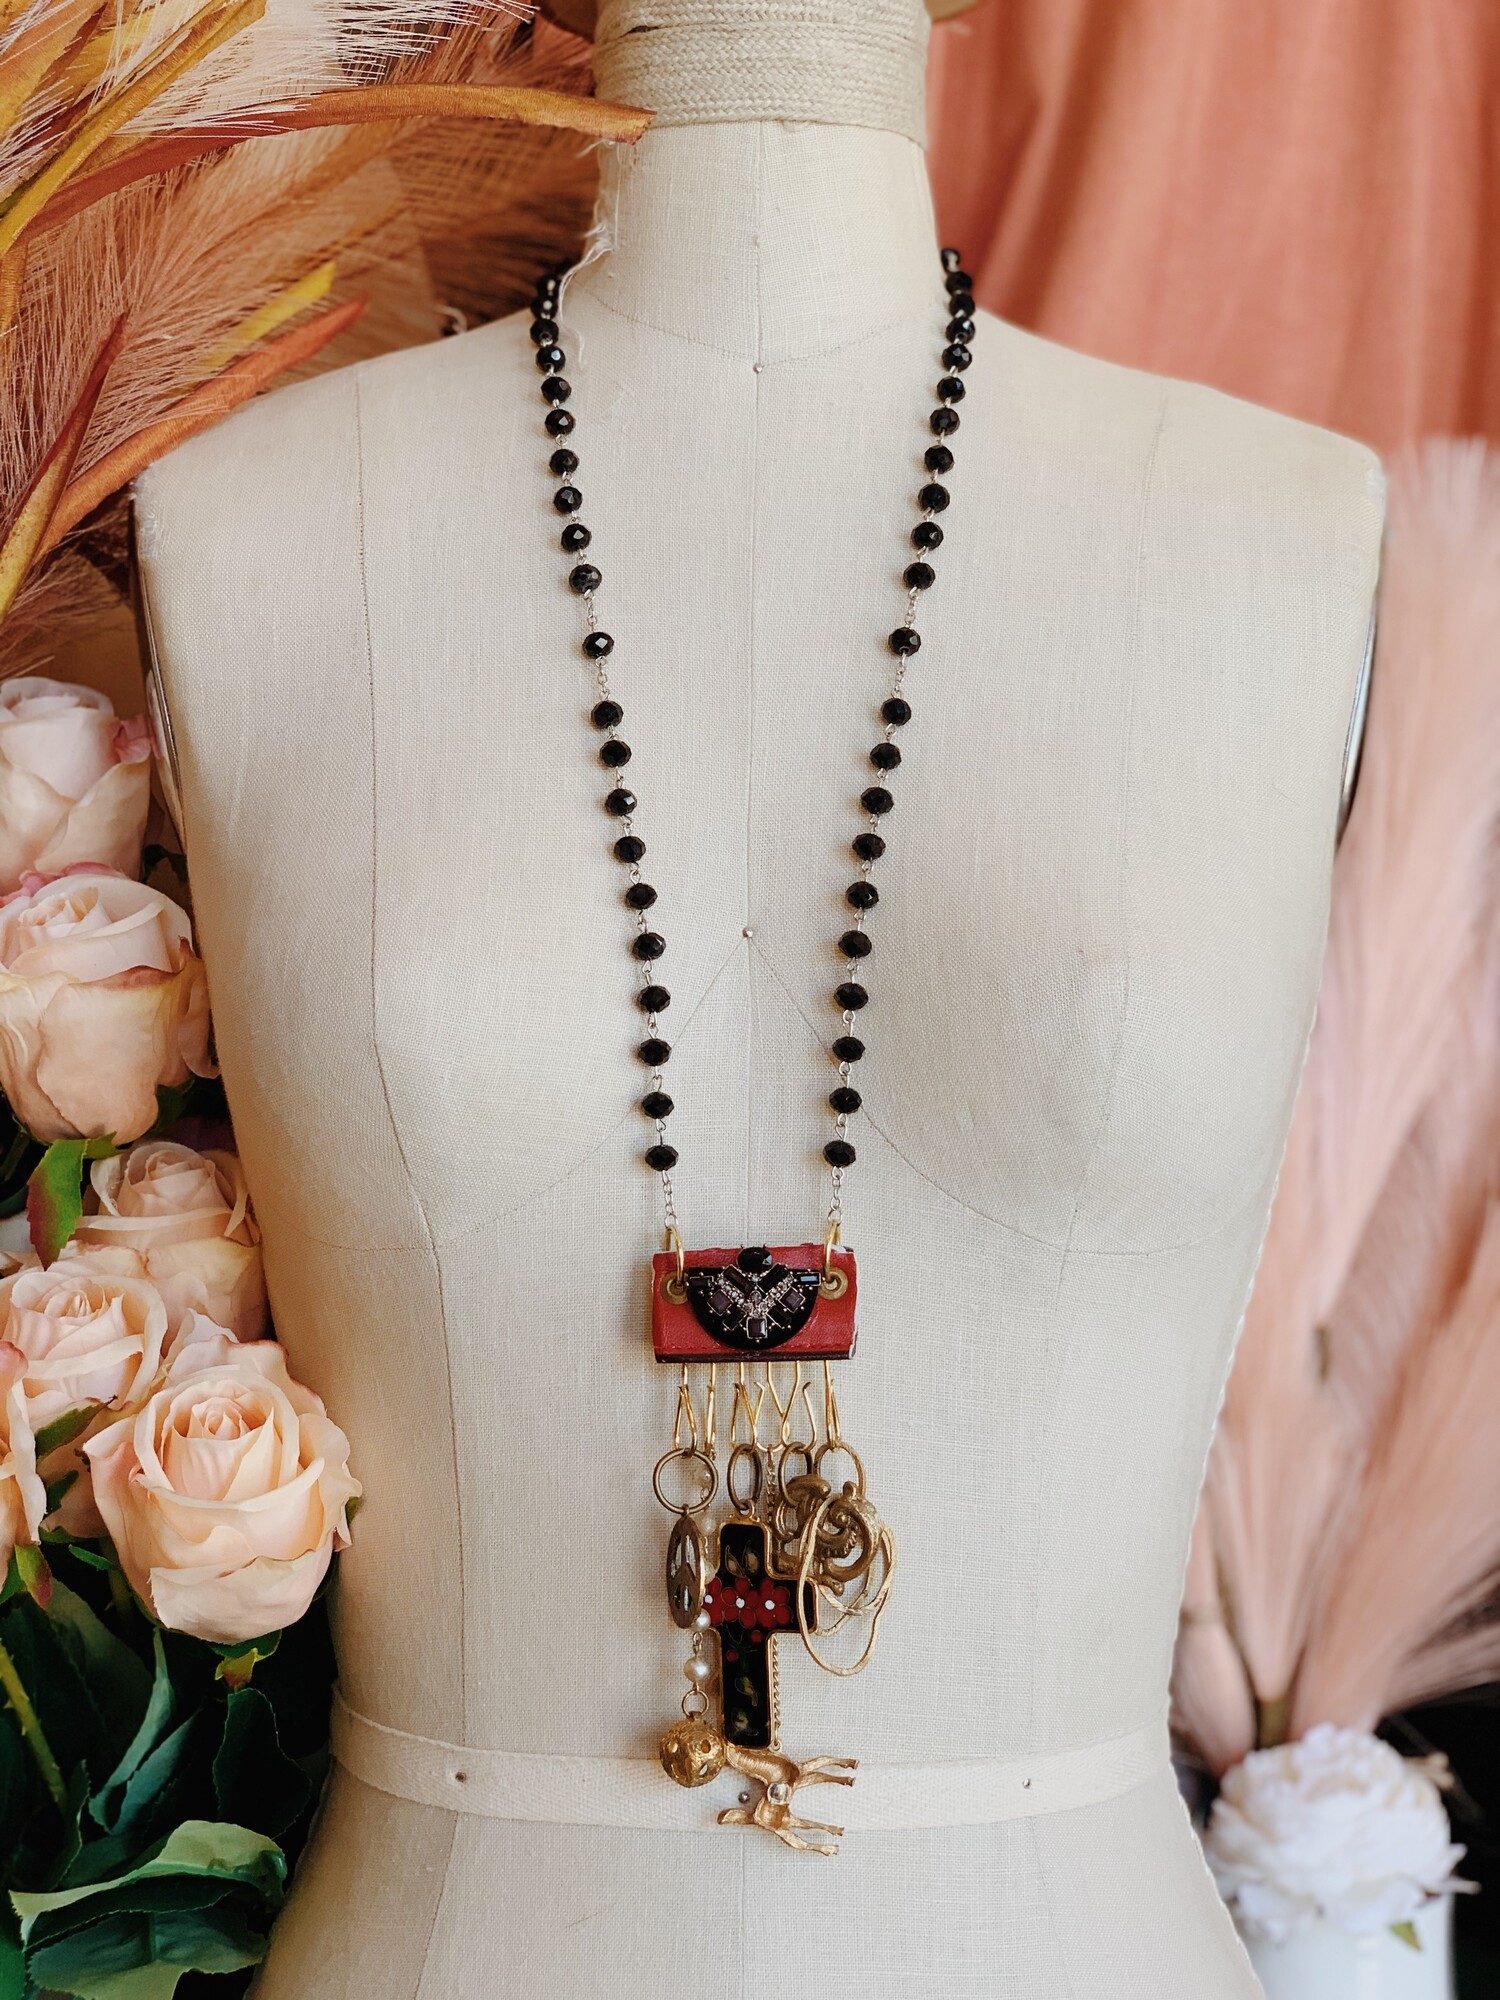 This handmade necklace is on a 28 inch chain!